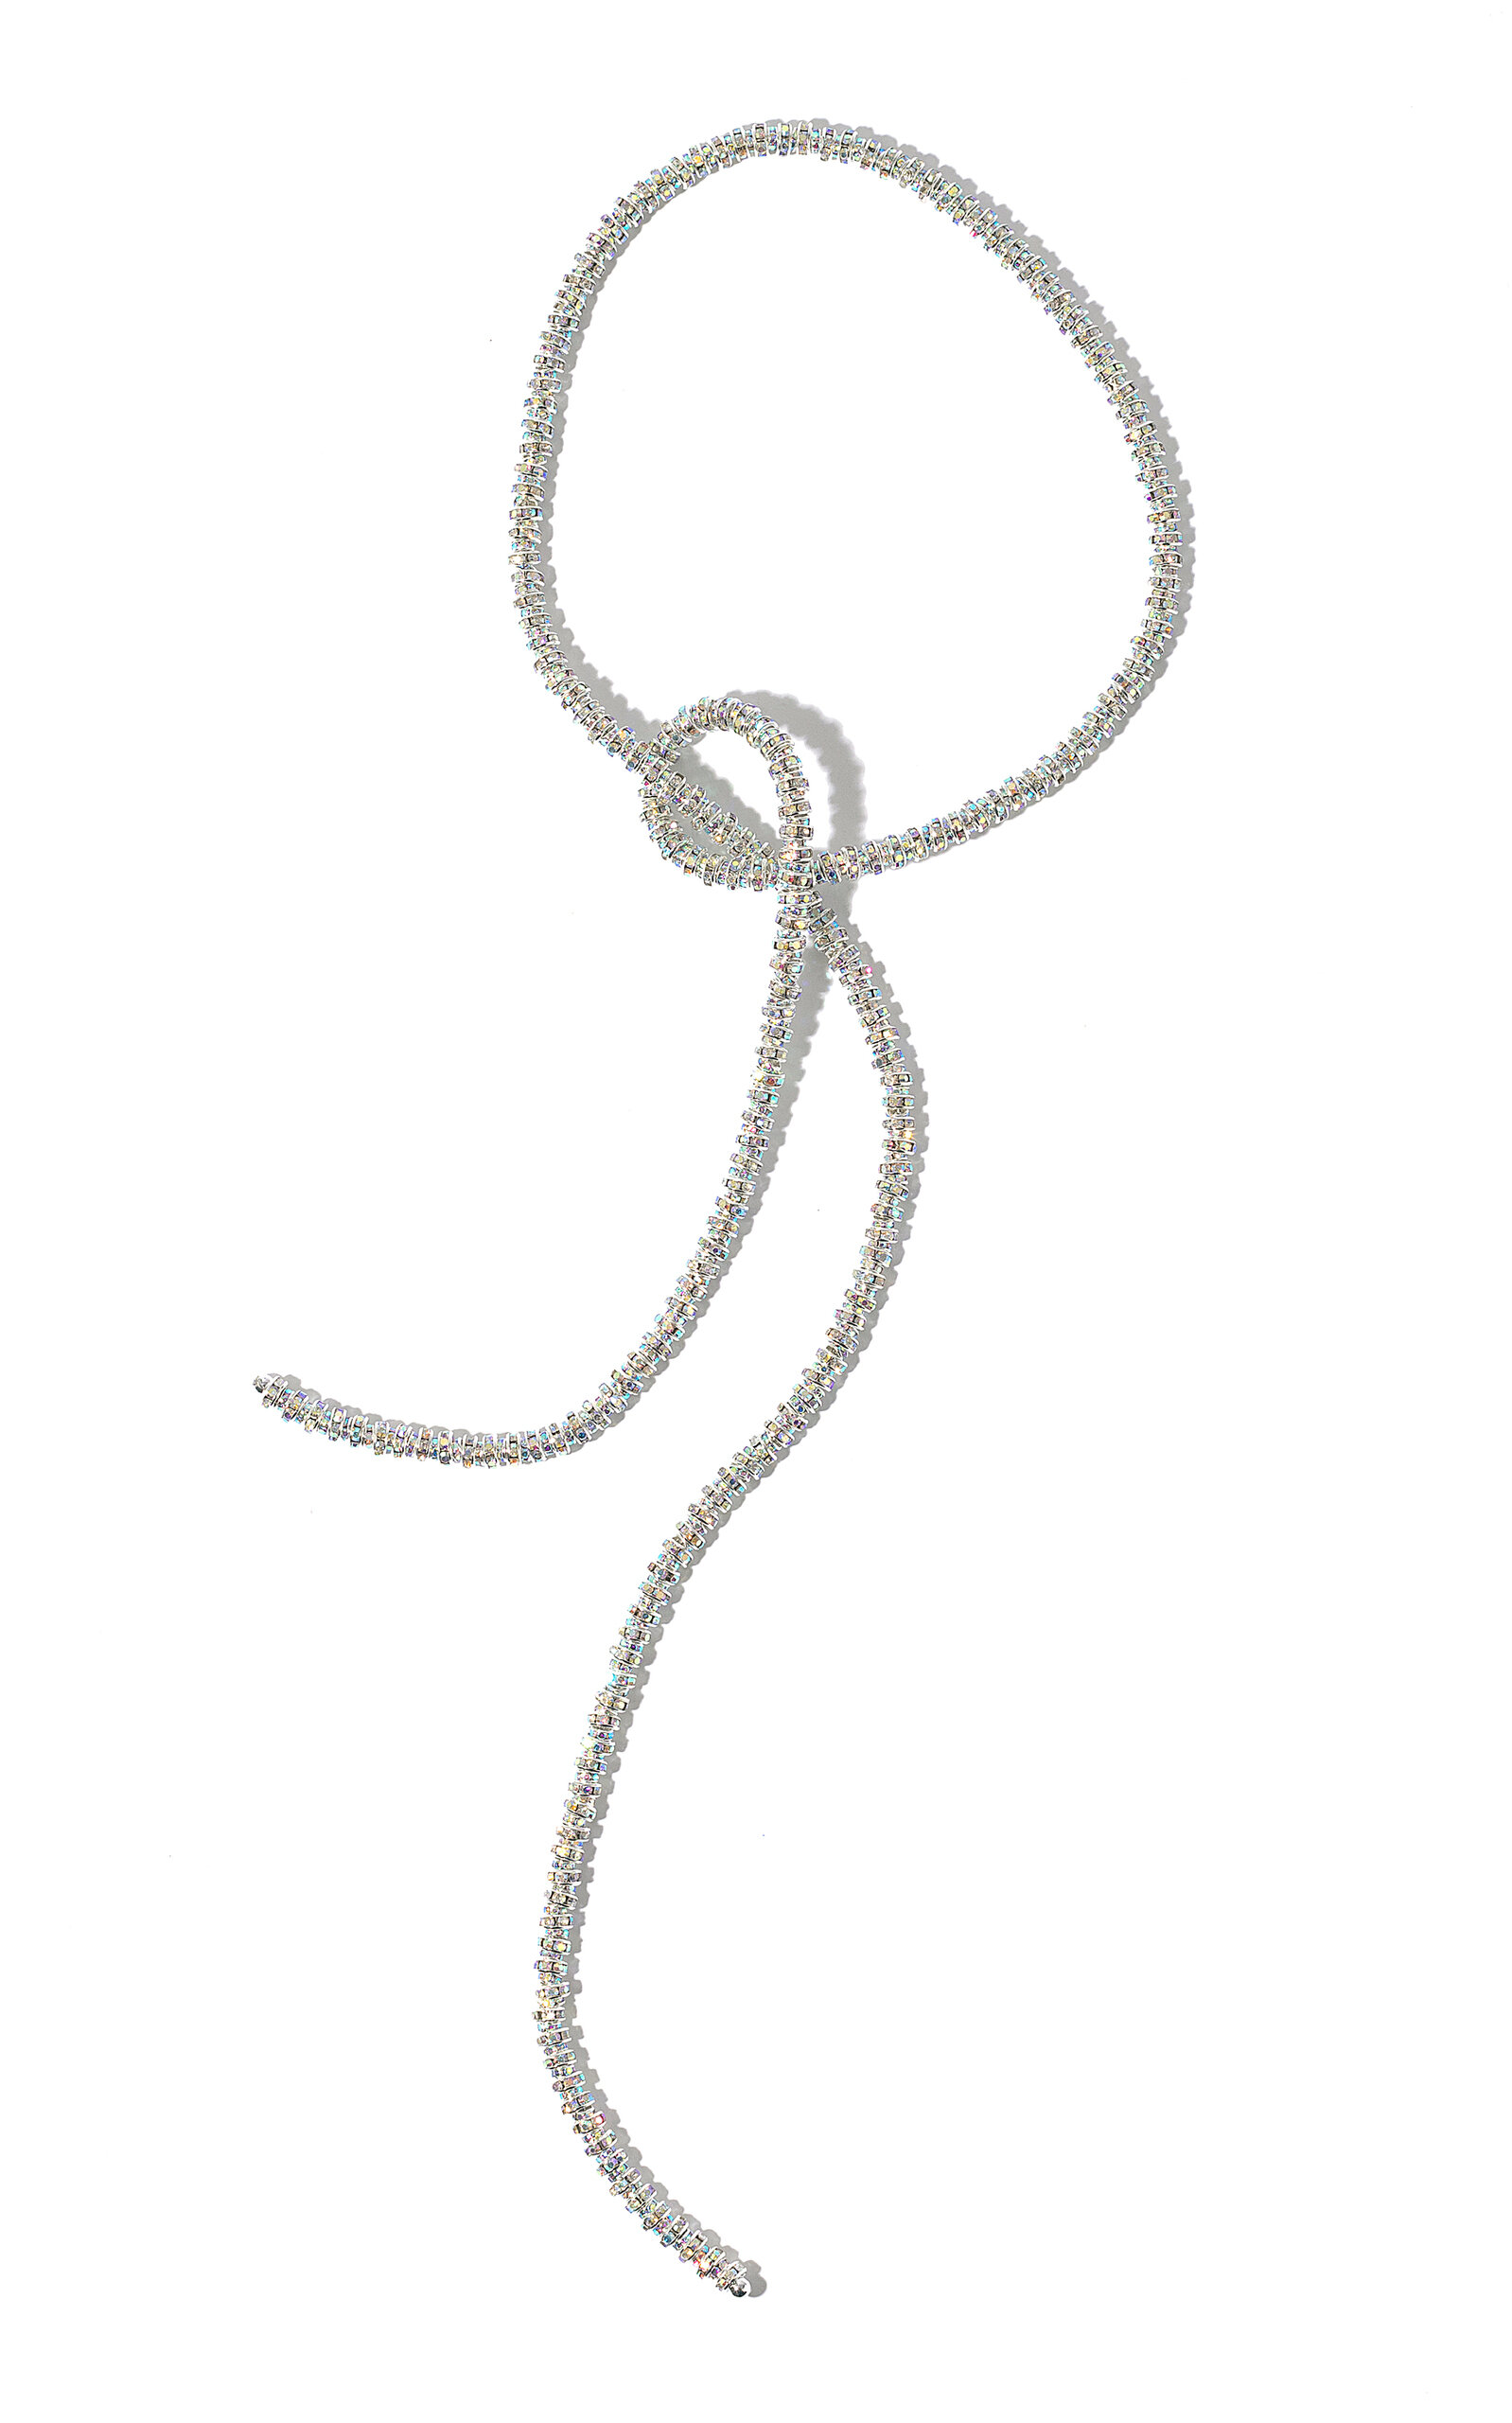 Skinny Serpent Chain Wrap Necklace